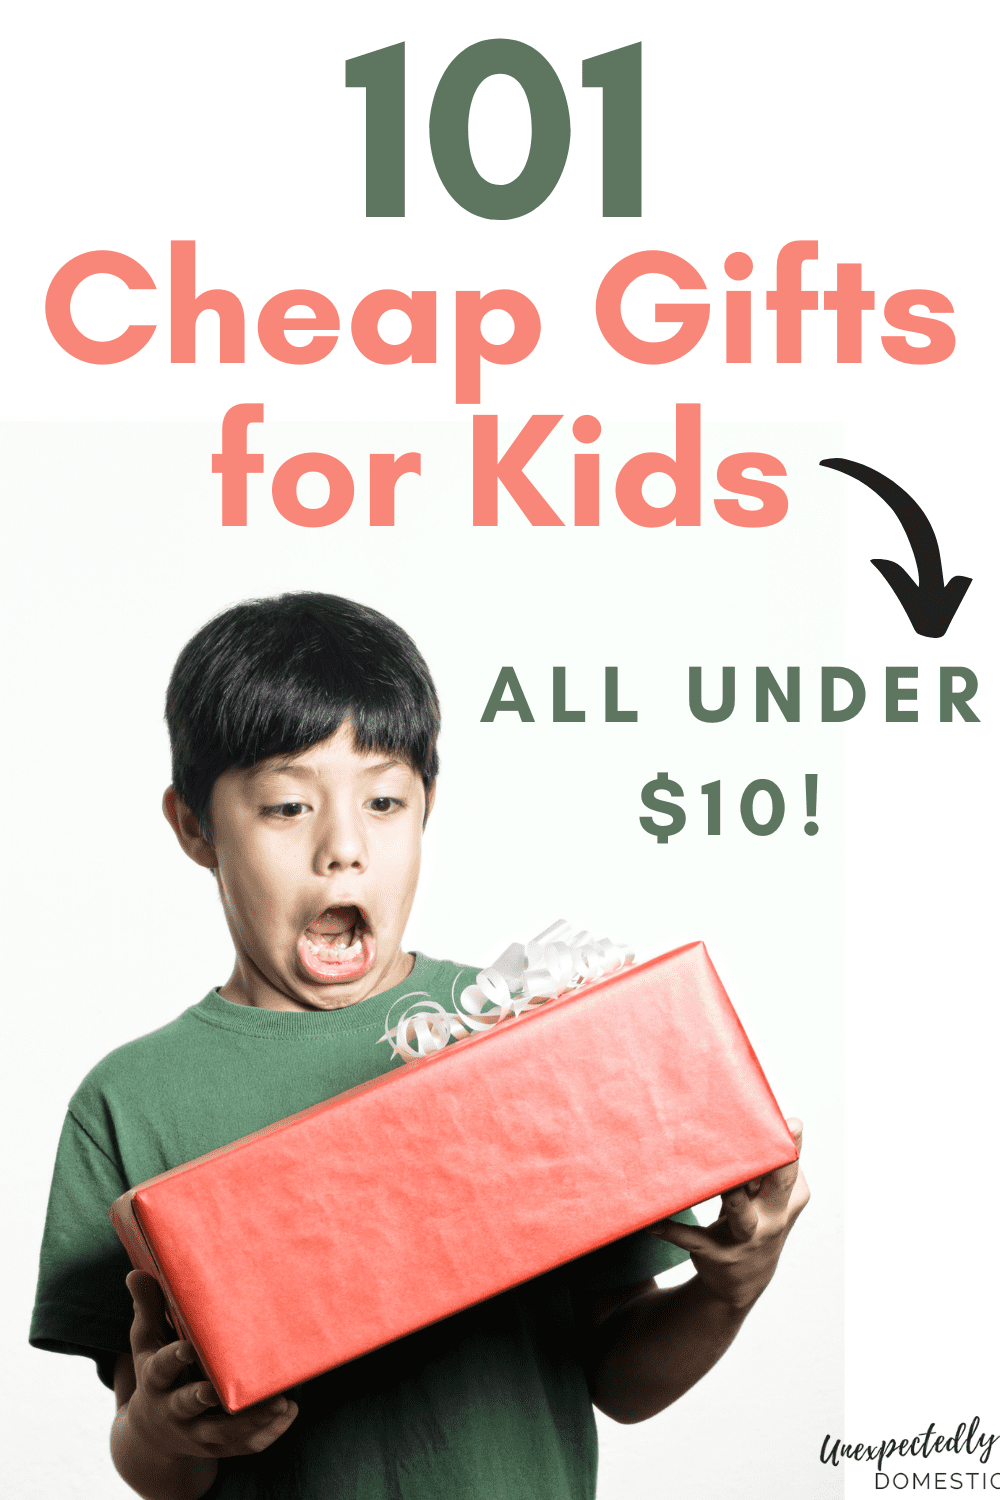 https://www.unexpectedlydomestic.com/wp-content/uploads/2021/11/cheap-fun-kids-gifts-under-10.png